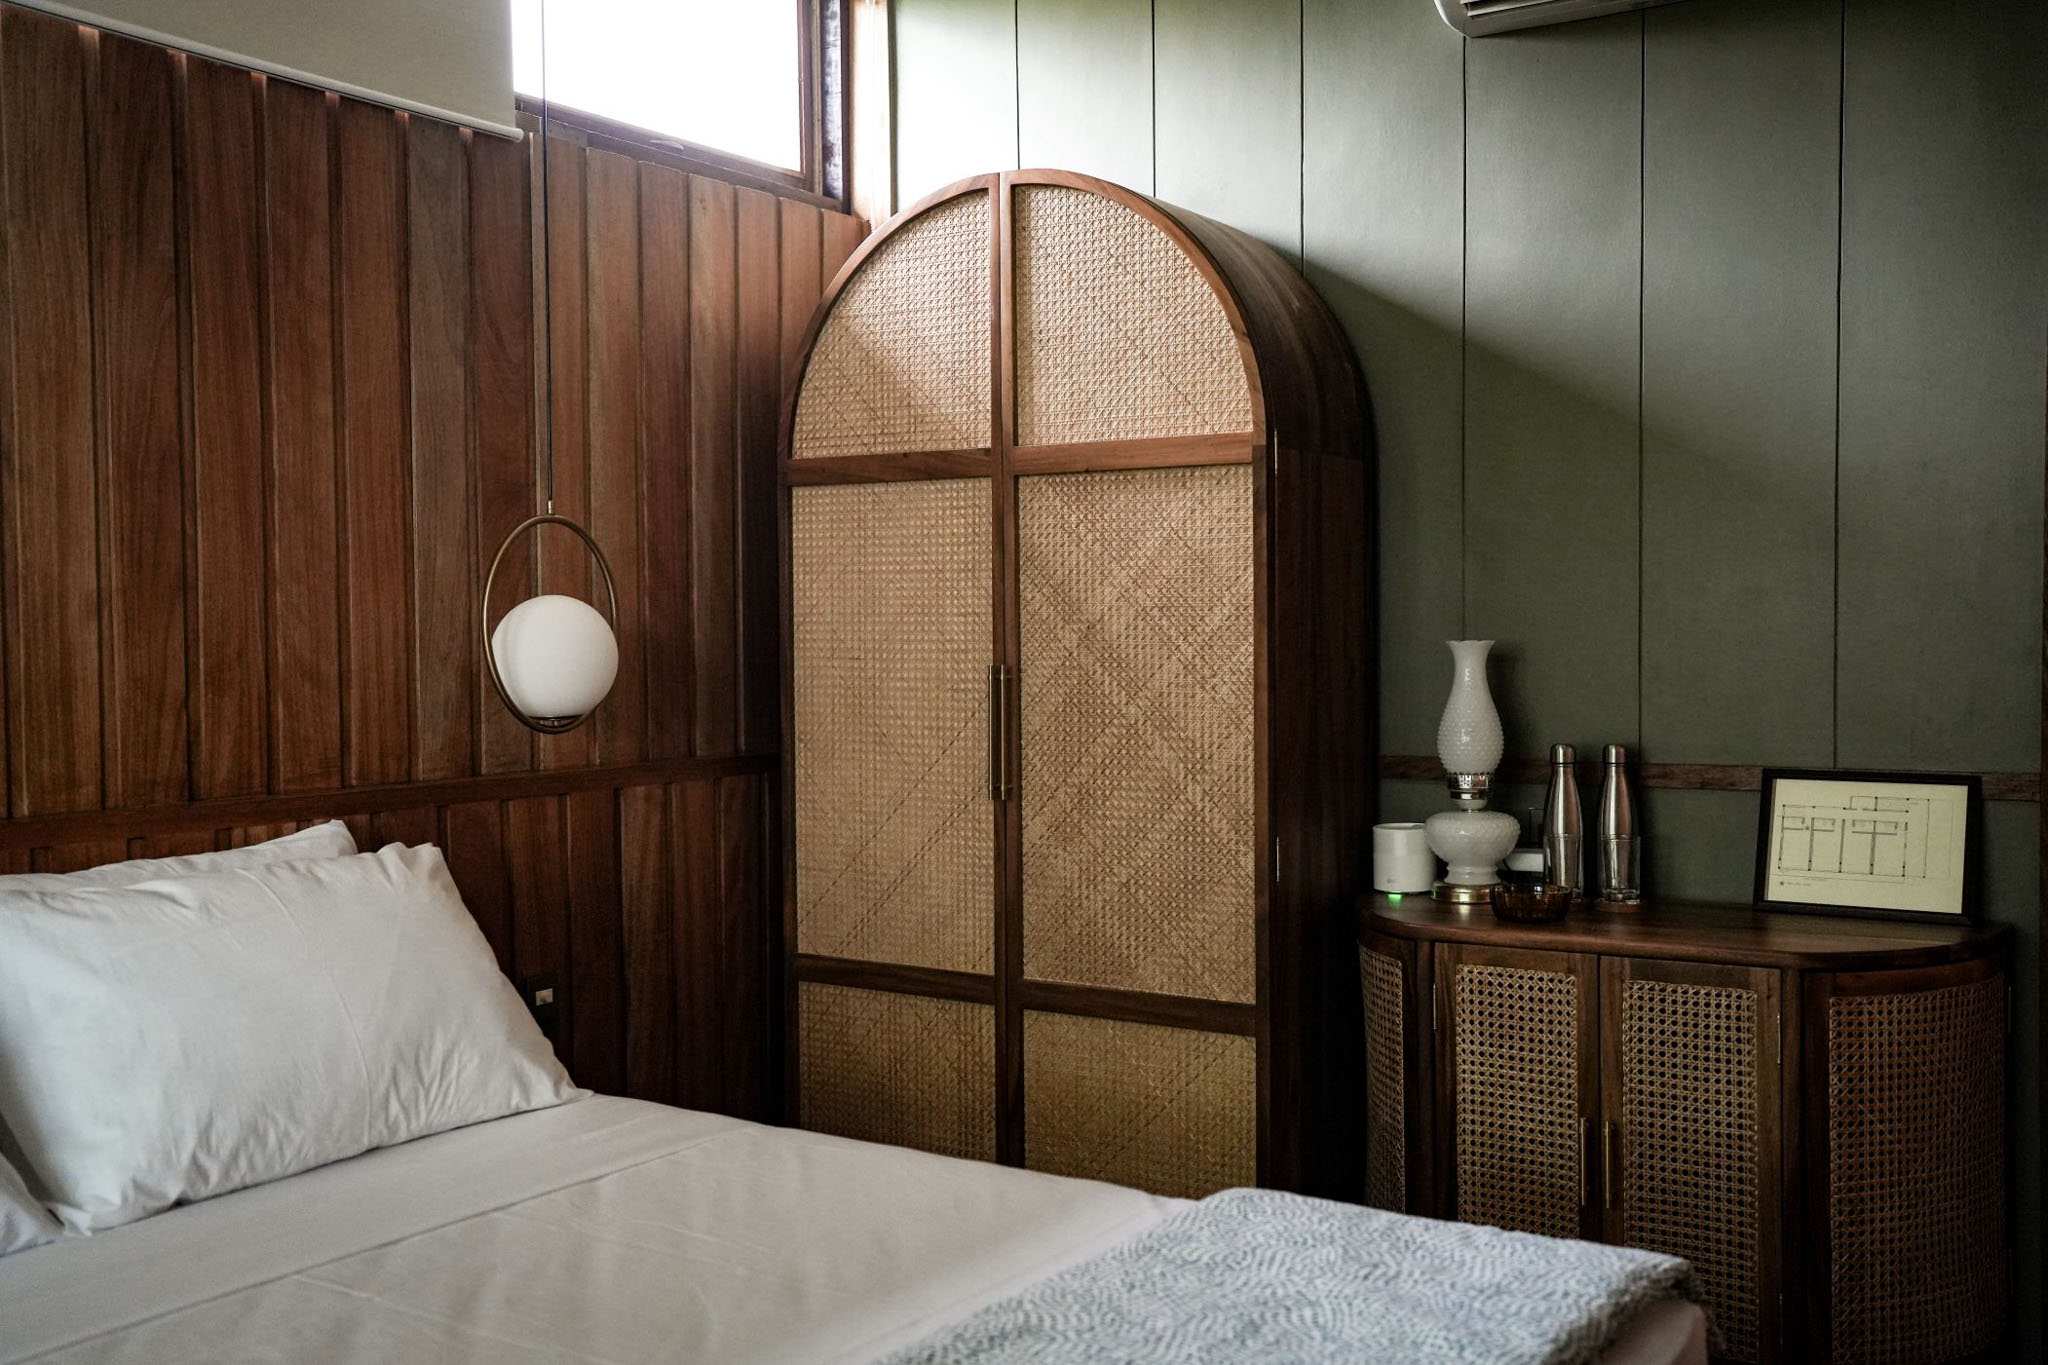 A bedroom in the Lark located in San Juan, La Union, with a traditional closet with woven doors and reclaimed wood wall panels.